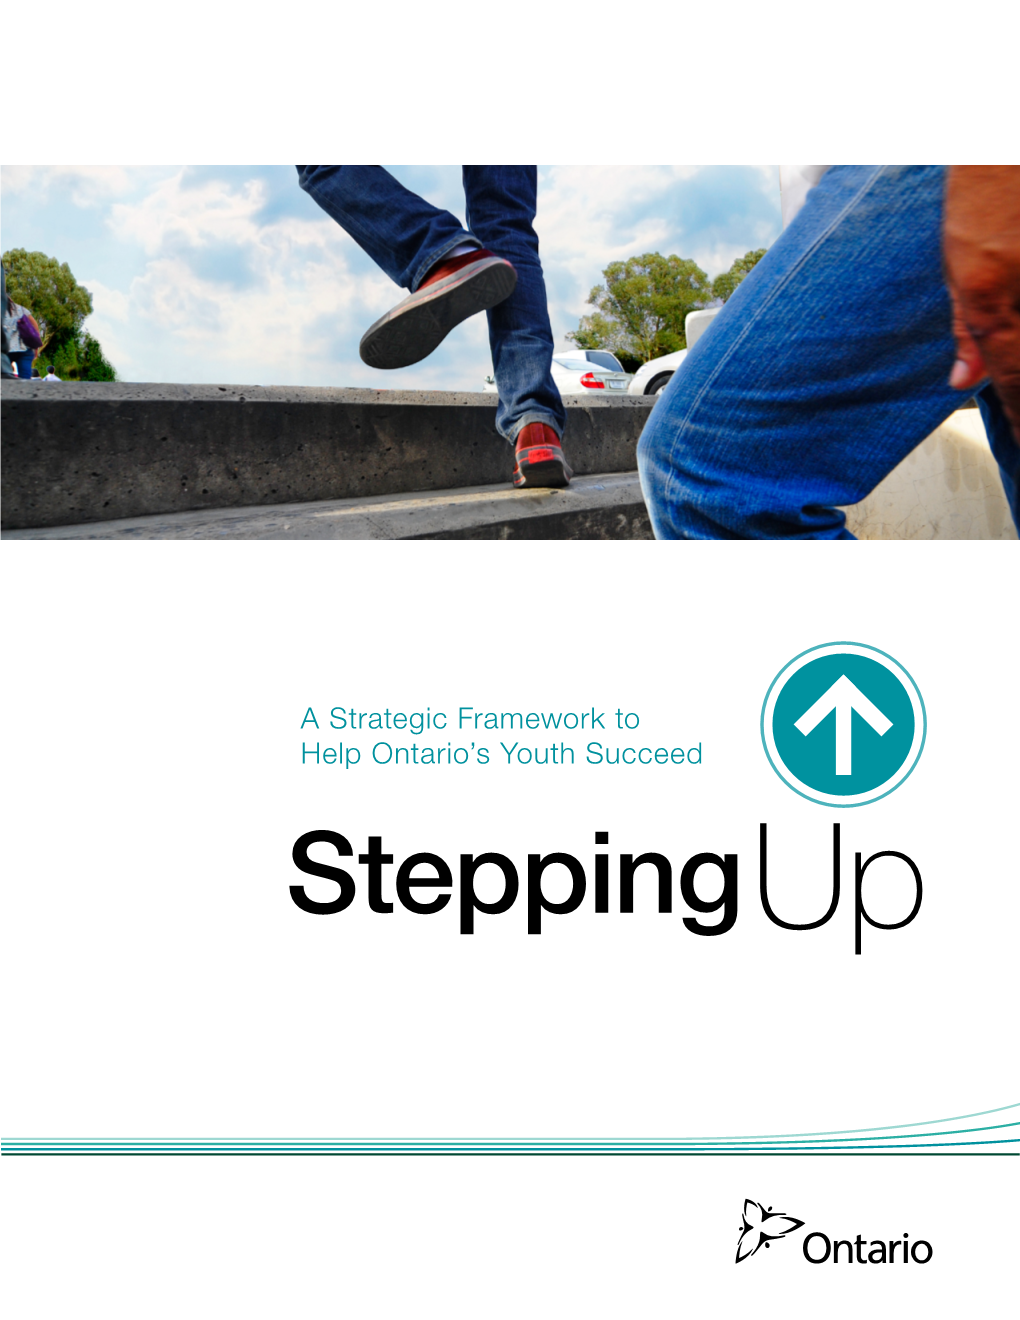 Stepping Up: a Strategic Framework to Help Ontario's Youth Succeed